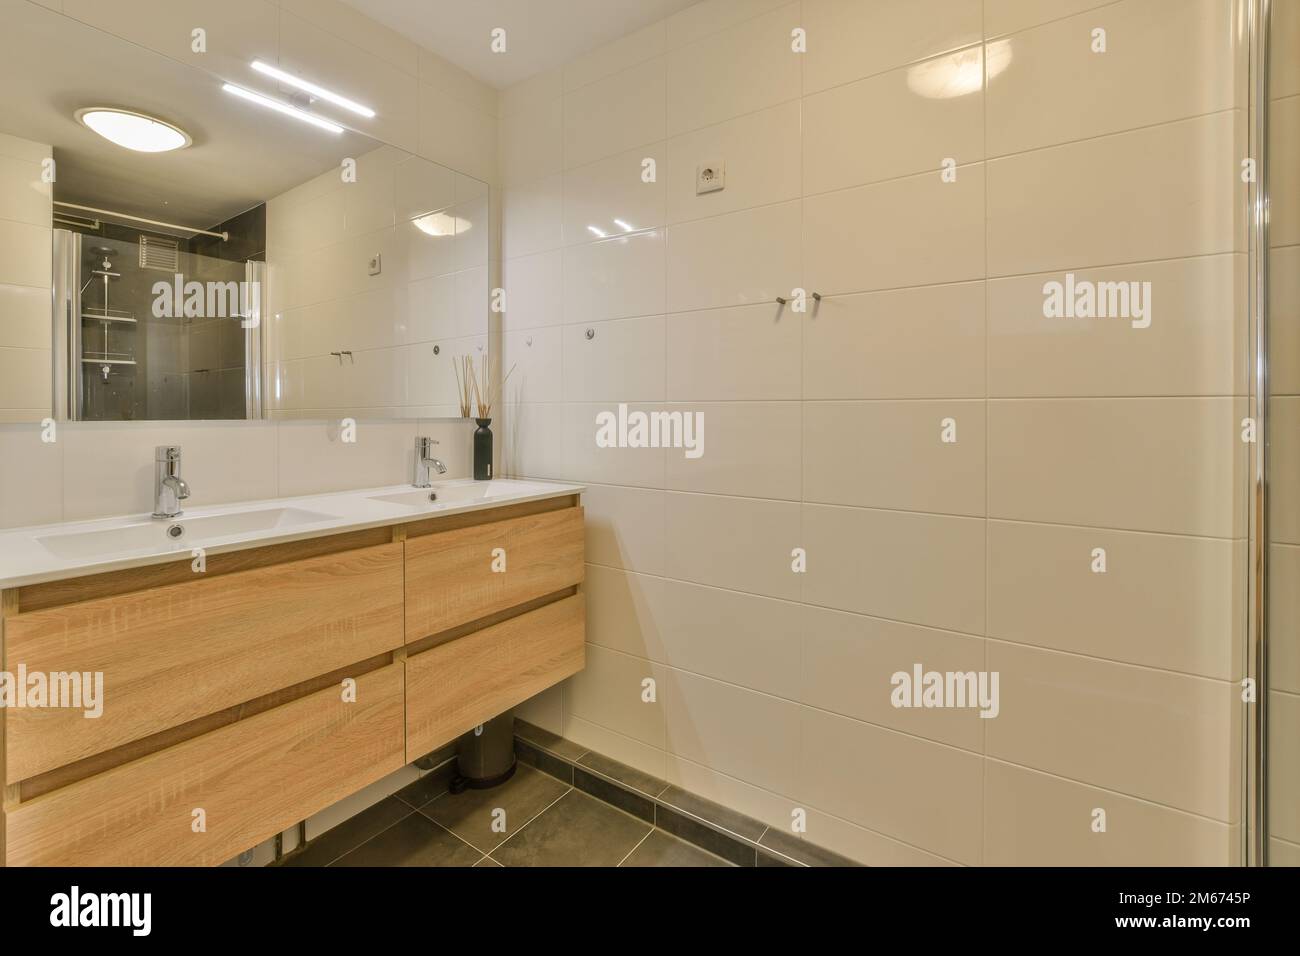 a modern bathroom with wood cabinets and white tiles on the walls, along with a large mirror in the corner Stock Photo